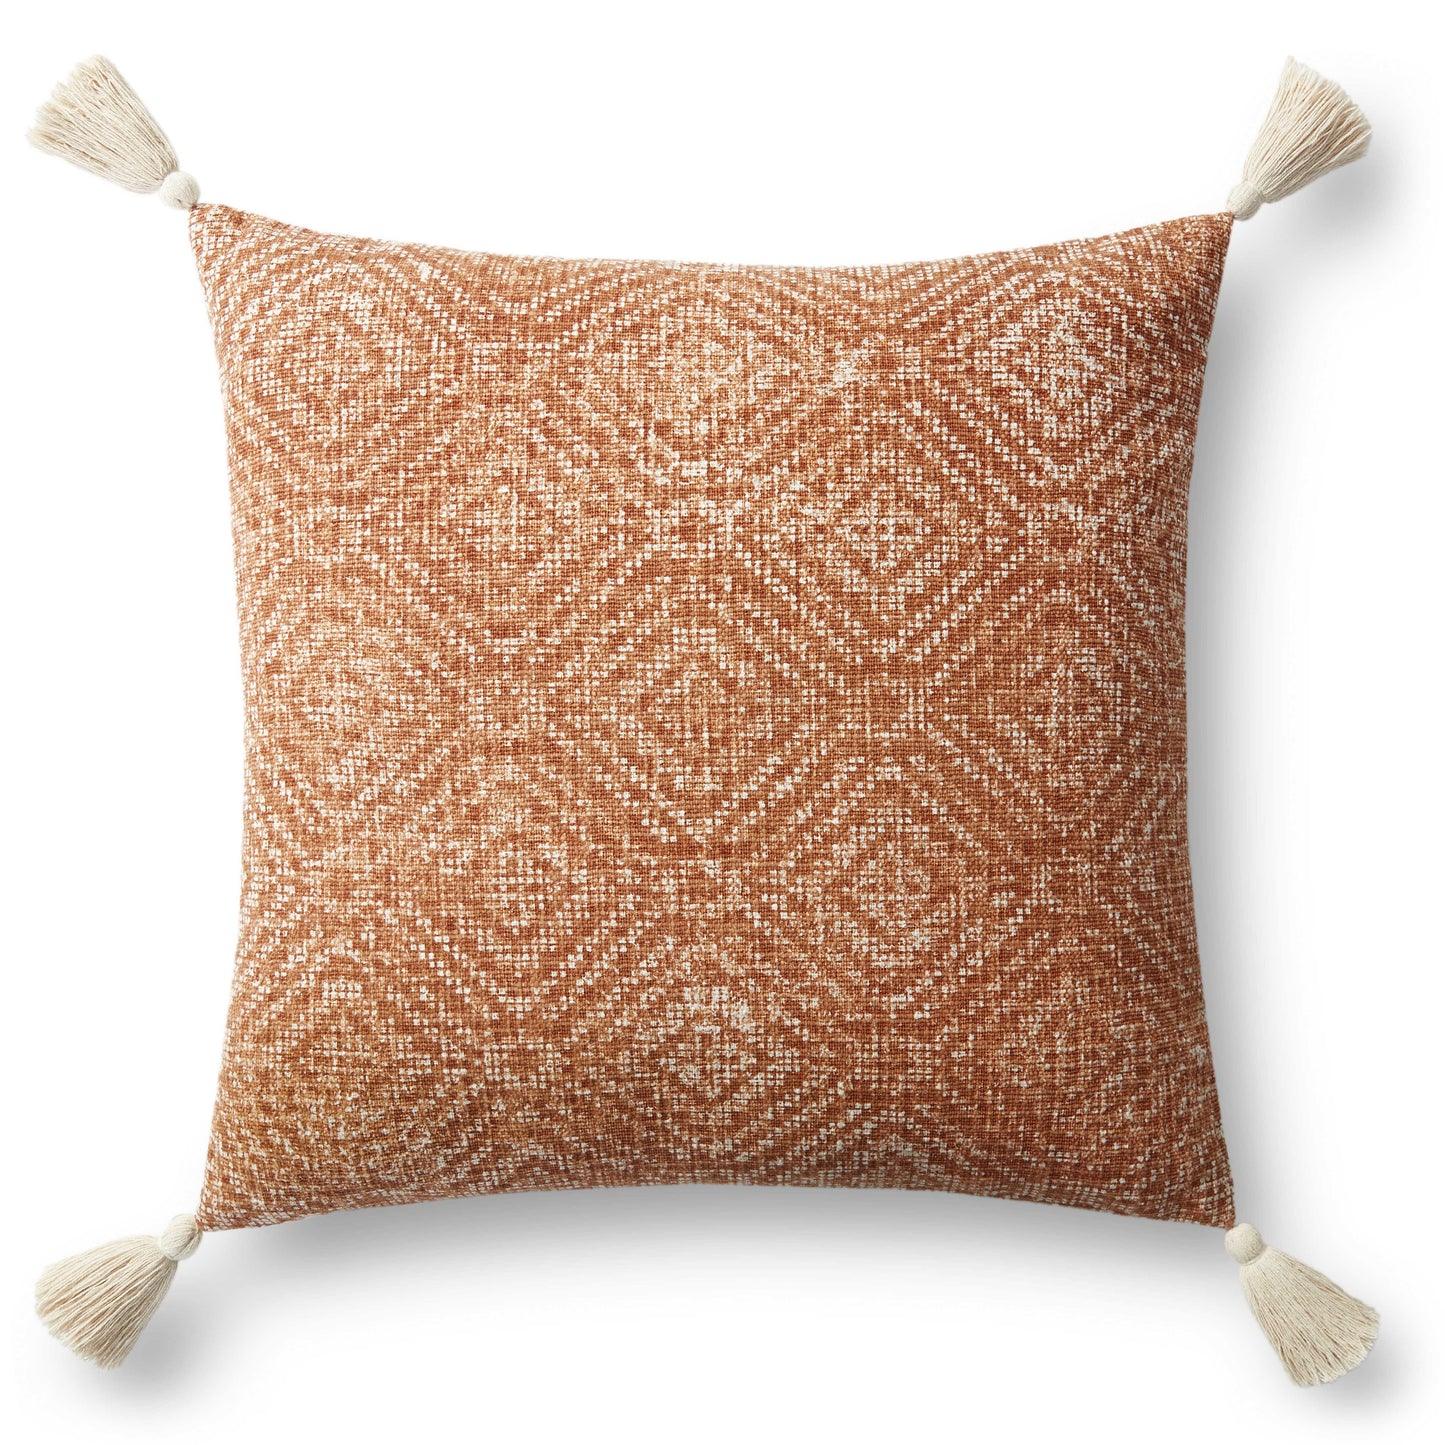 Photo of a pillow;  P0621 Orange 13" x 21" Cover w/Poly Pillow